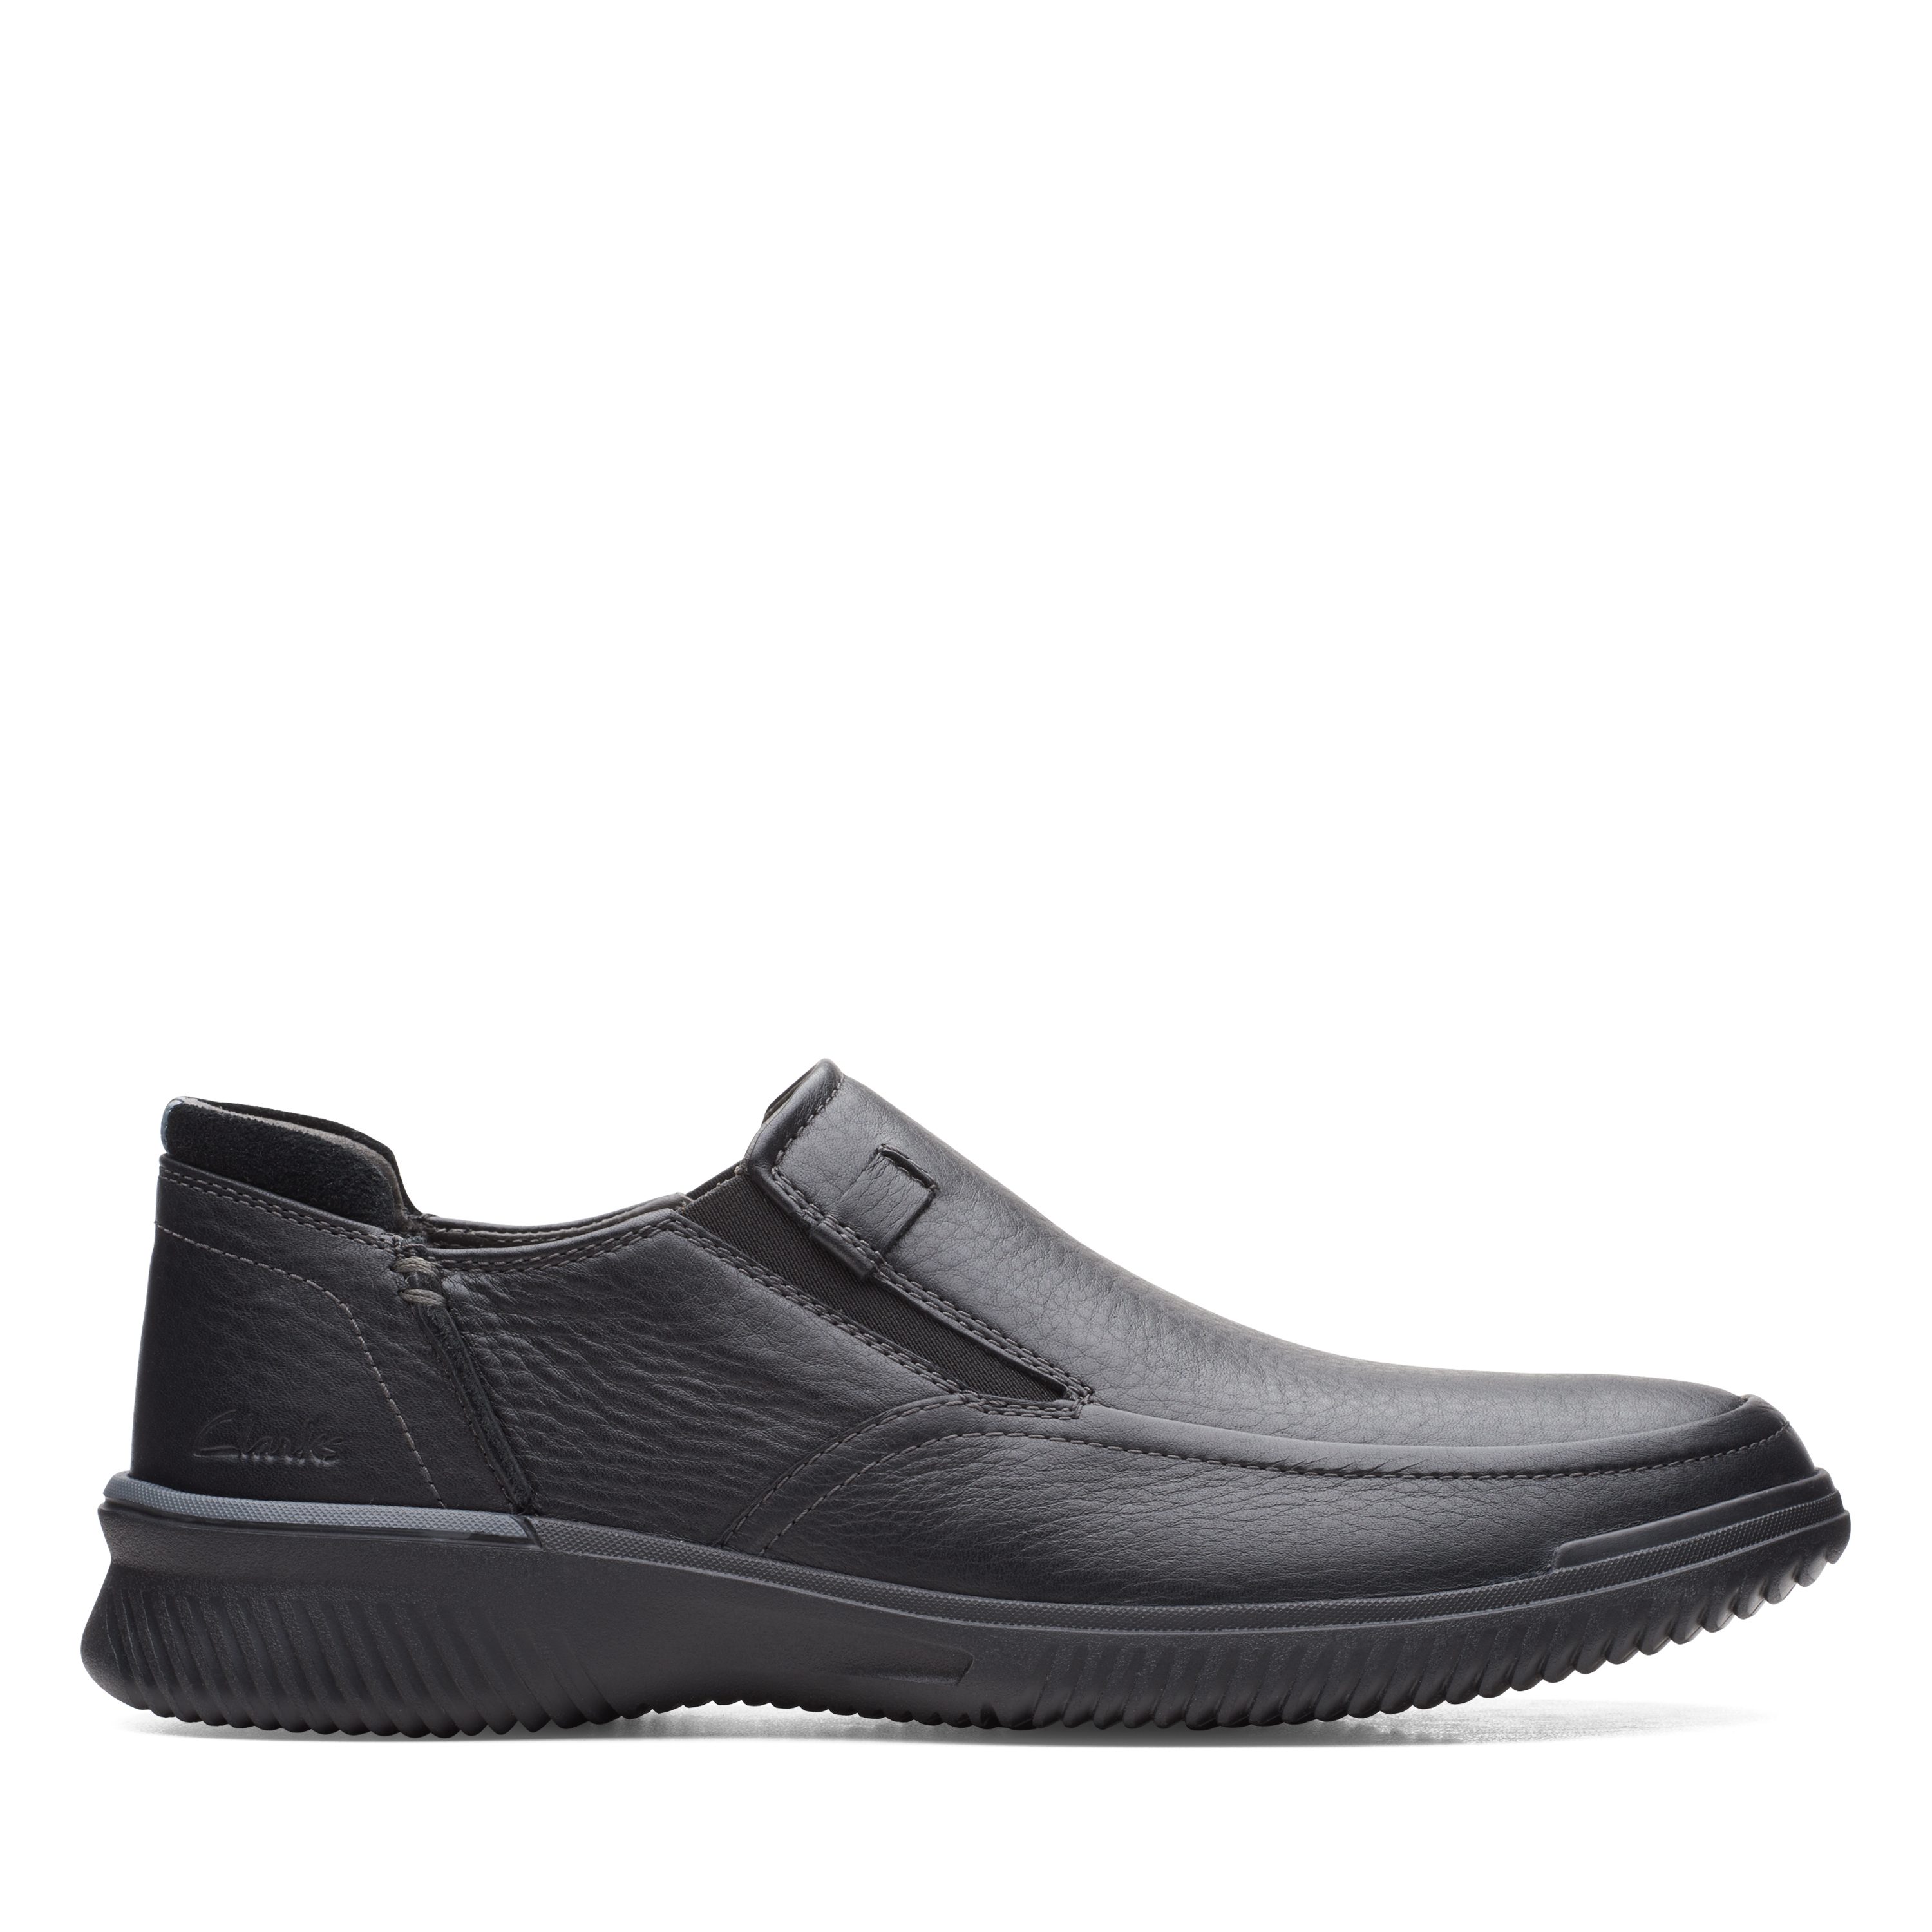 Clarks – Casual Donaway Step ΑΝΔΡ.ΥΠΟΔΗΜΑ